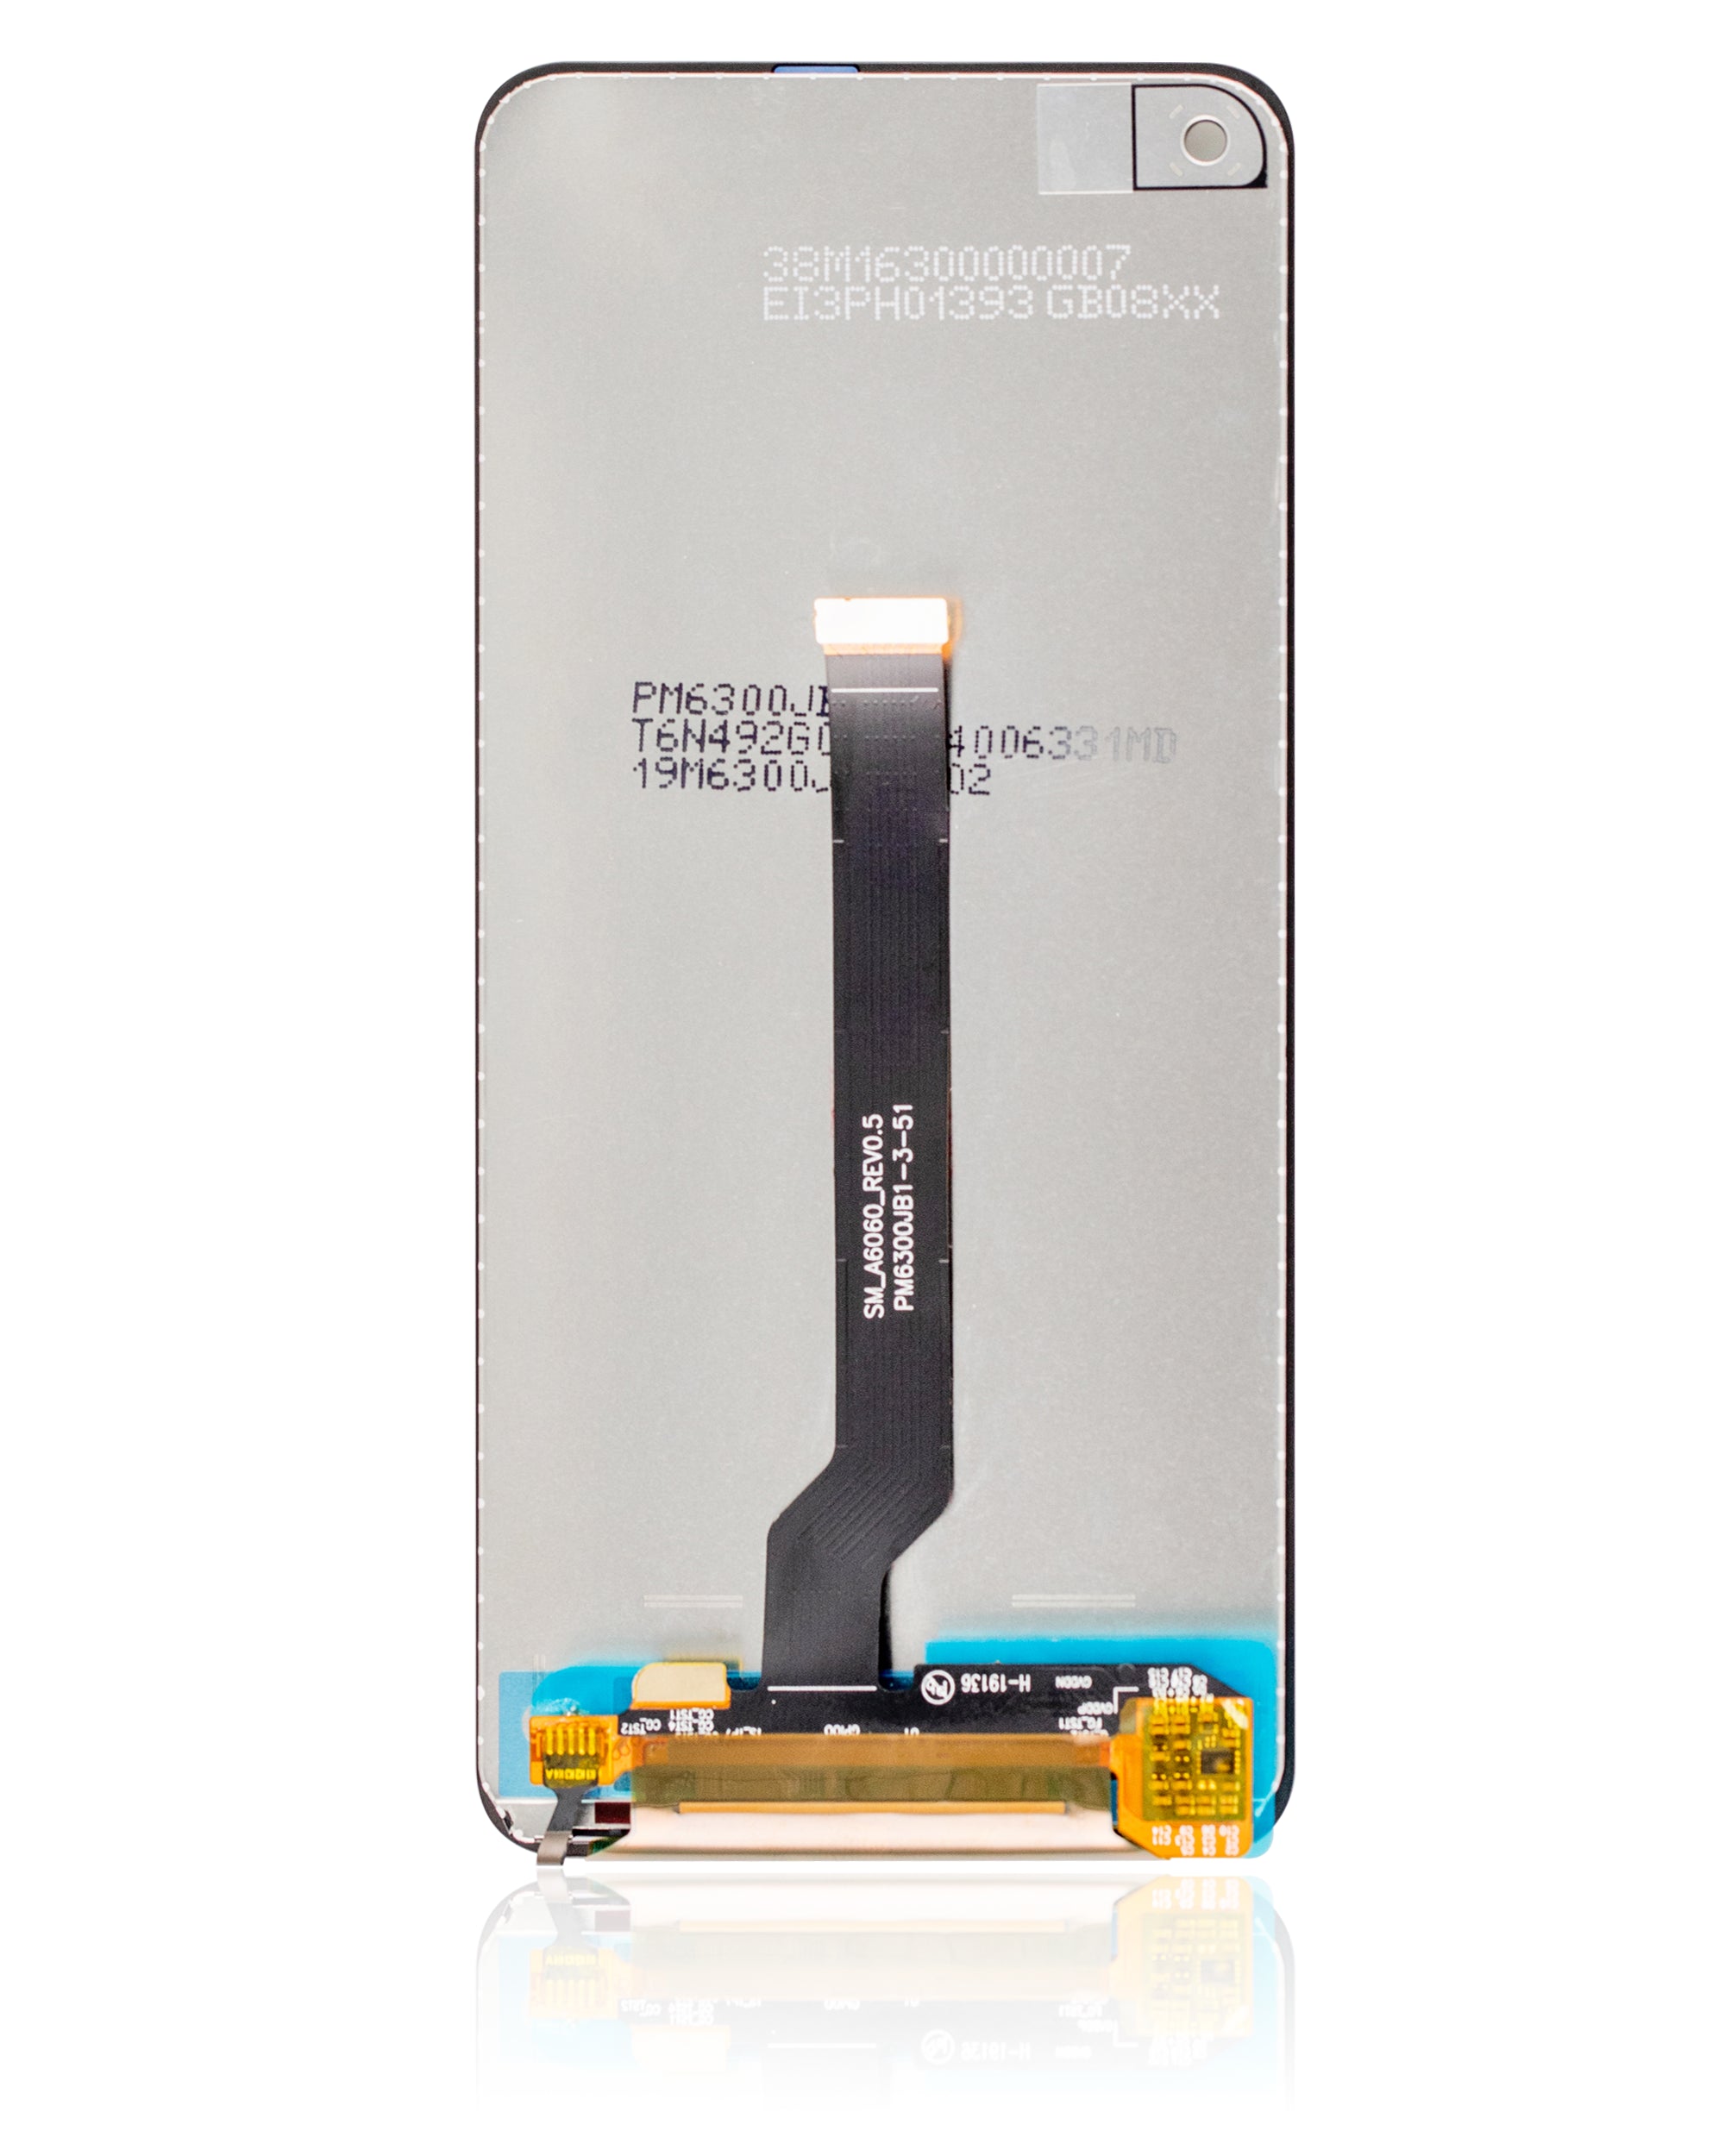 For Samsung Galaxy A60 (A606 / 2019) LCD Screen Replacement Without Frame (Oled Pro) (All Colors)